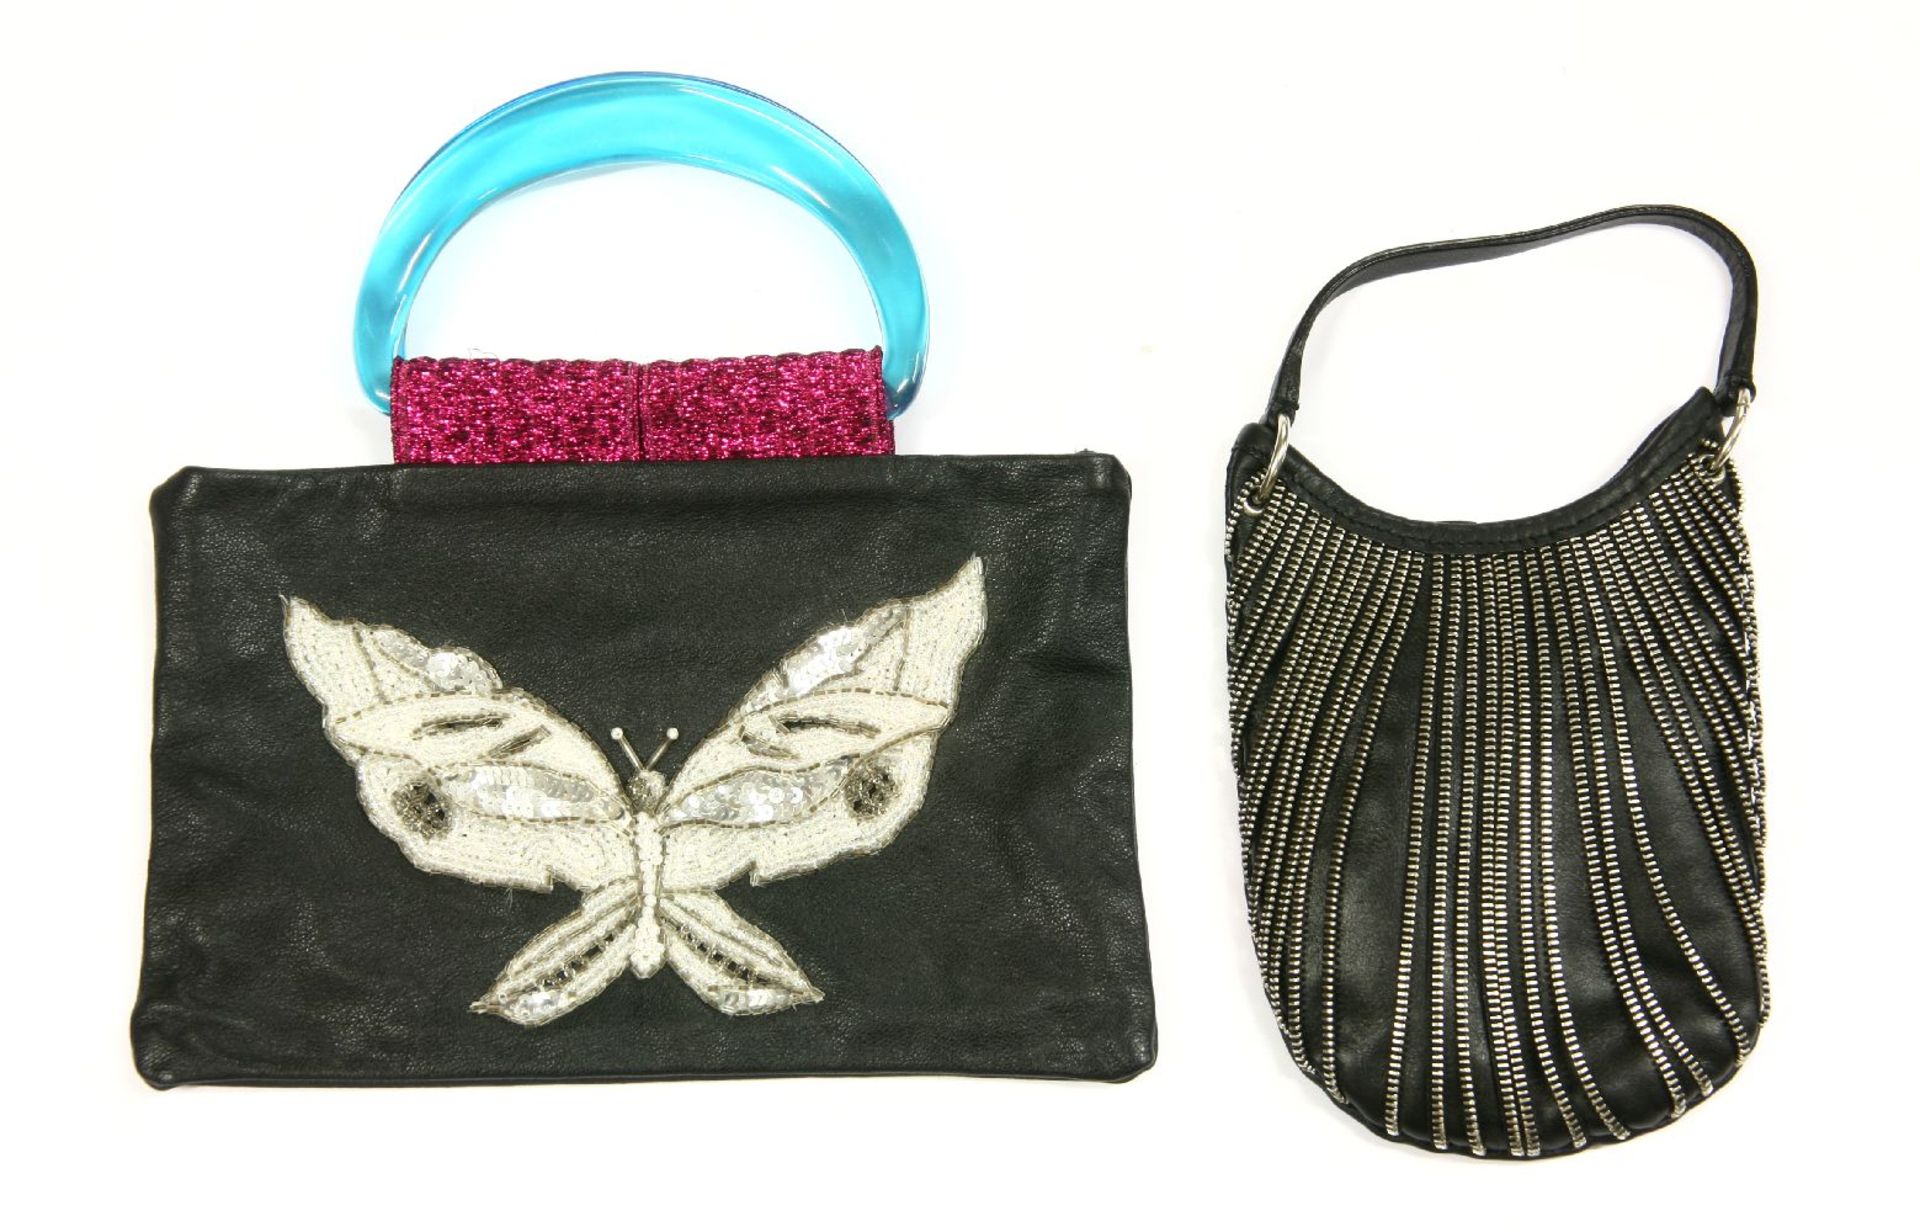 A MAWI black leather clutch handbag, with applied seed, bead and sequin butterfly, with blue Perspex